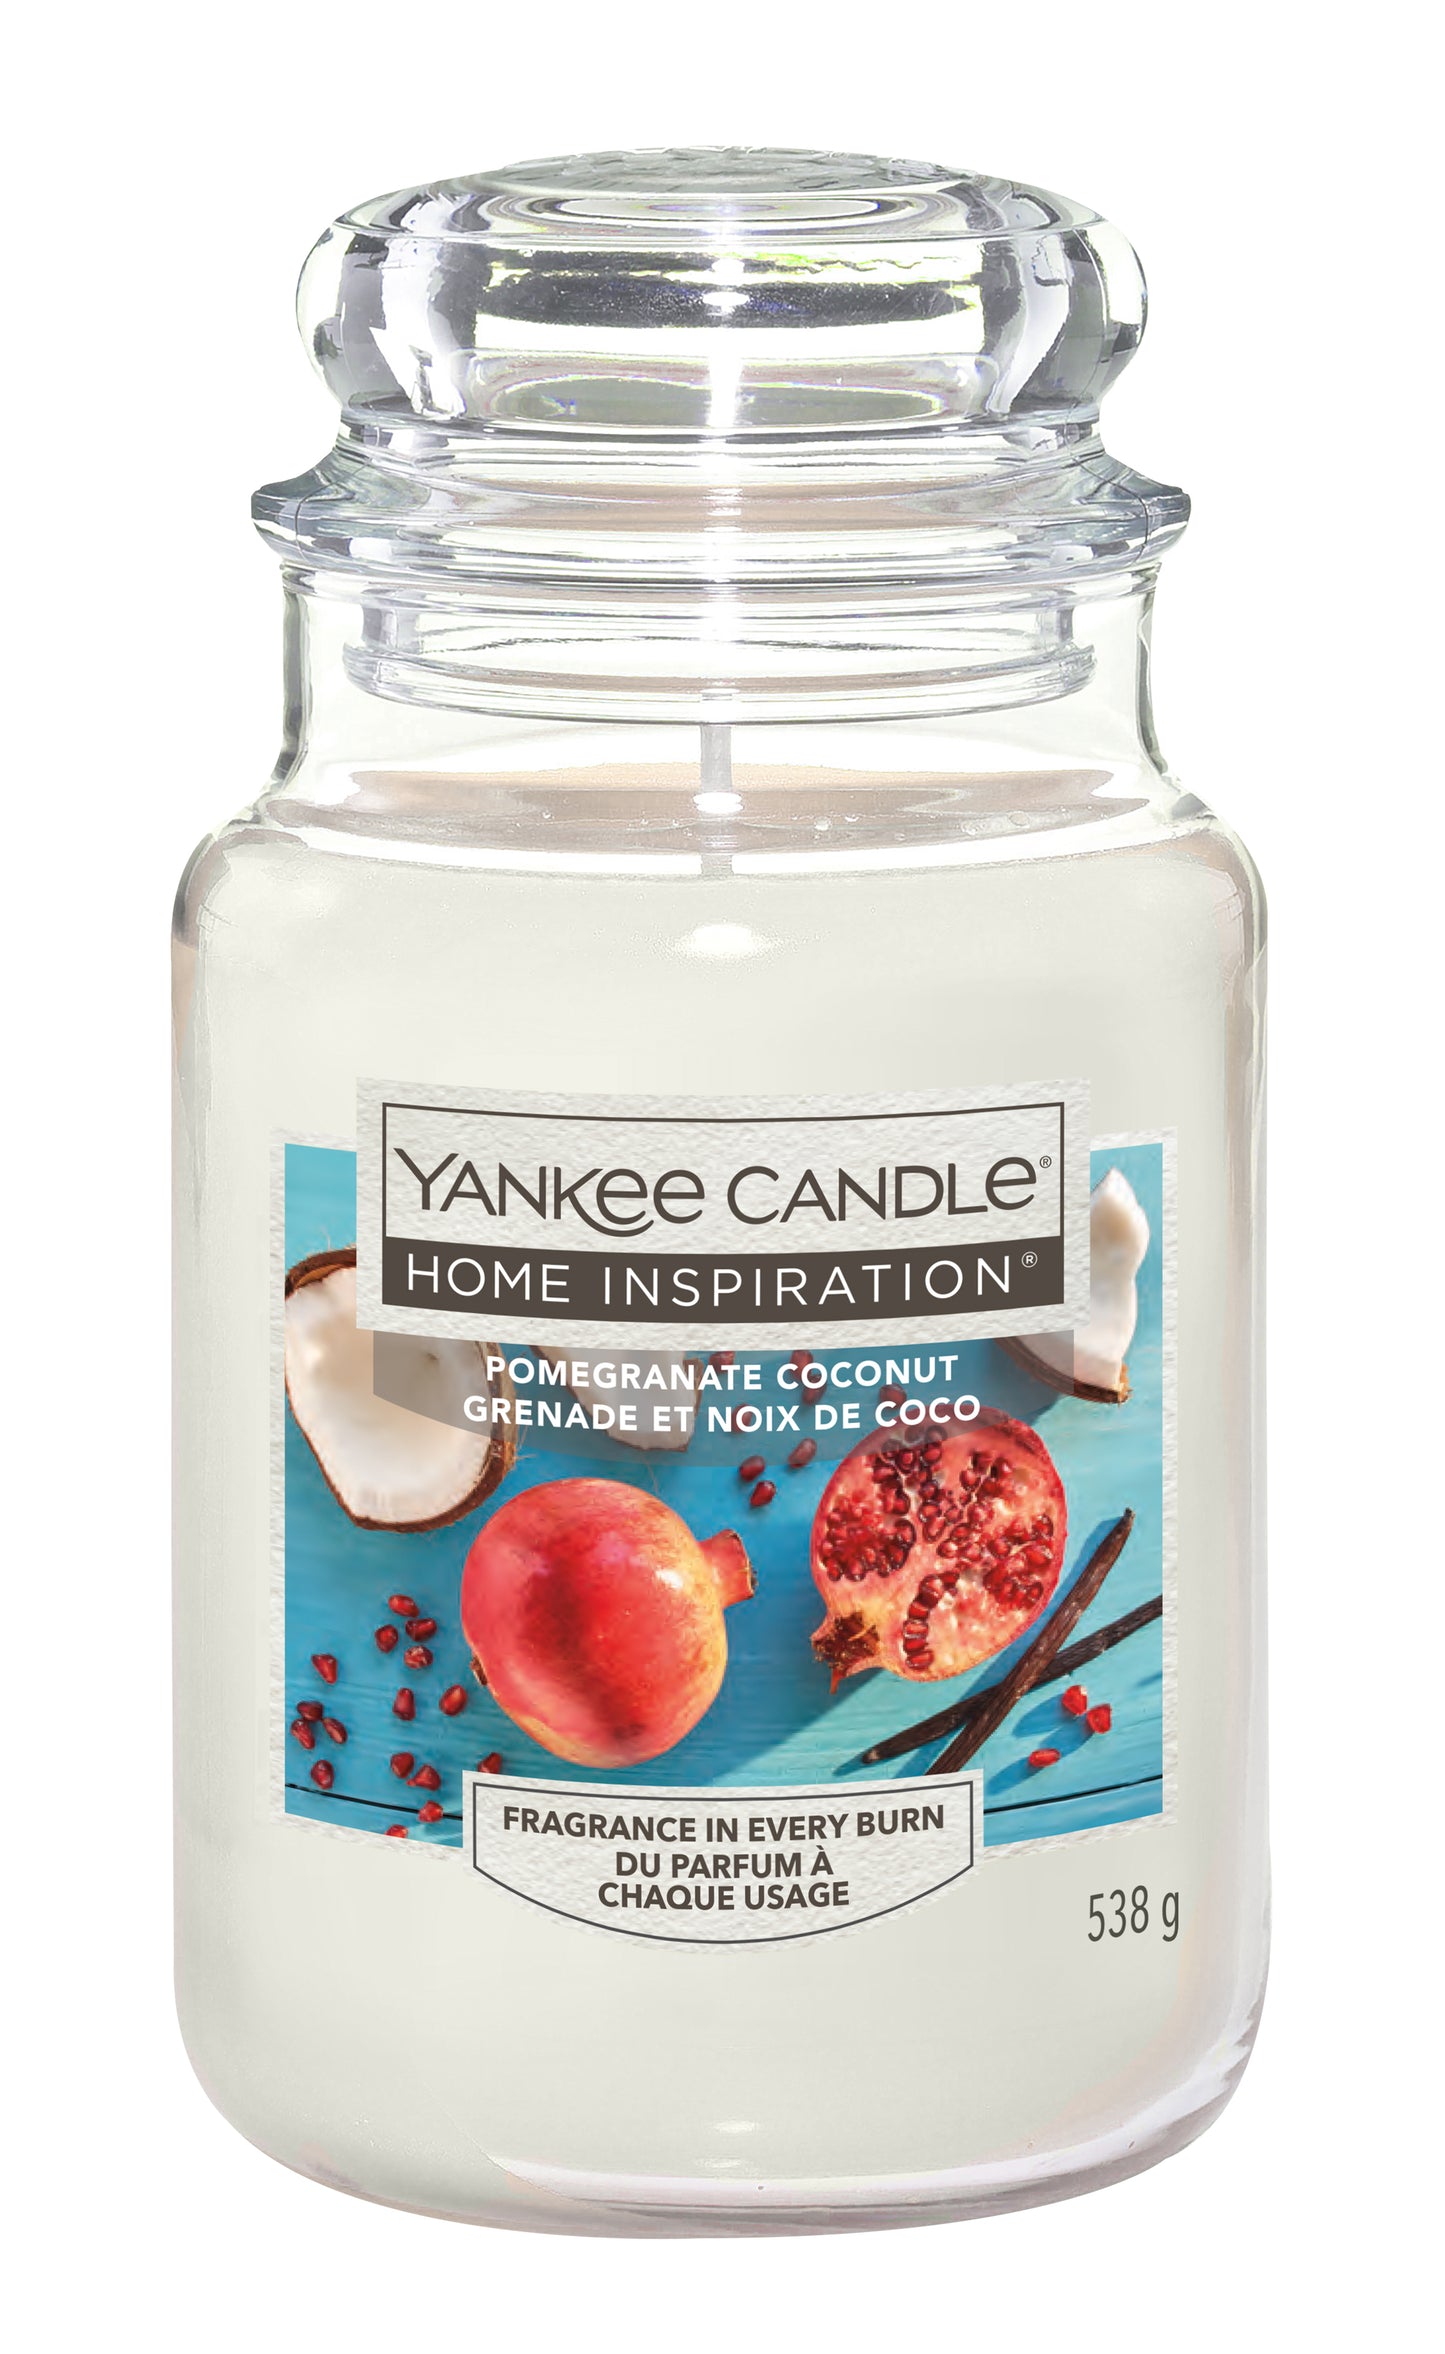 Pomegranate Coconut Large Jar Sweeten your home with the delicious and dreamy scents of pomegranate and coconut with the Yankee Candle® Home Inspiration® Pomegranate and Coconut Candle. 